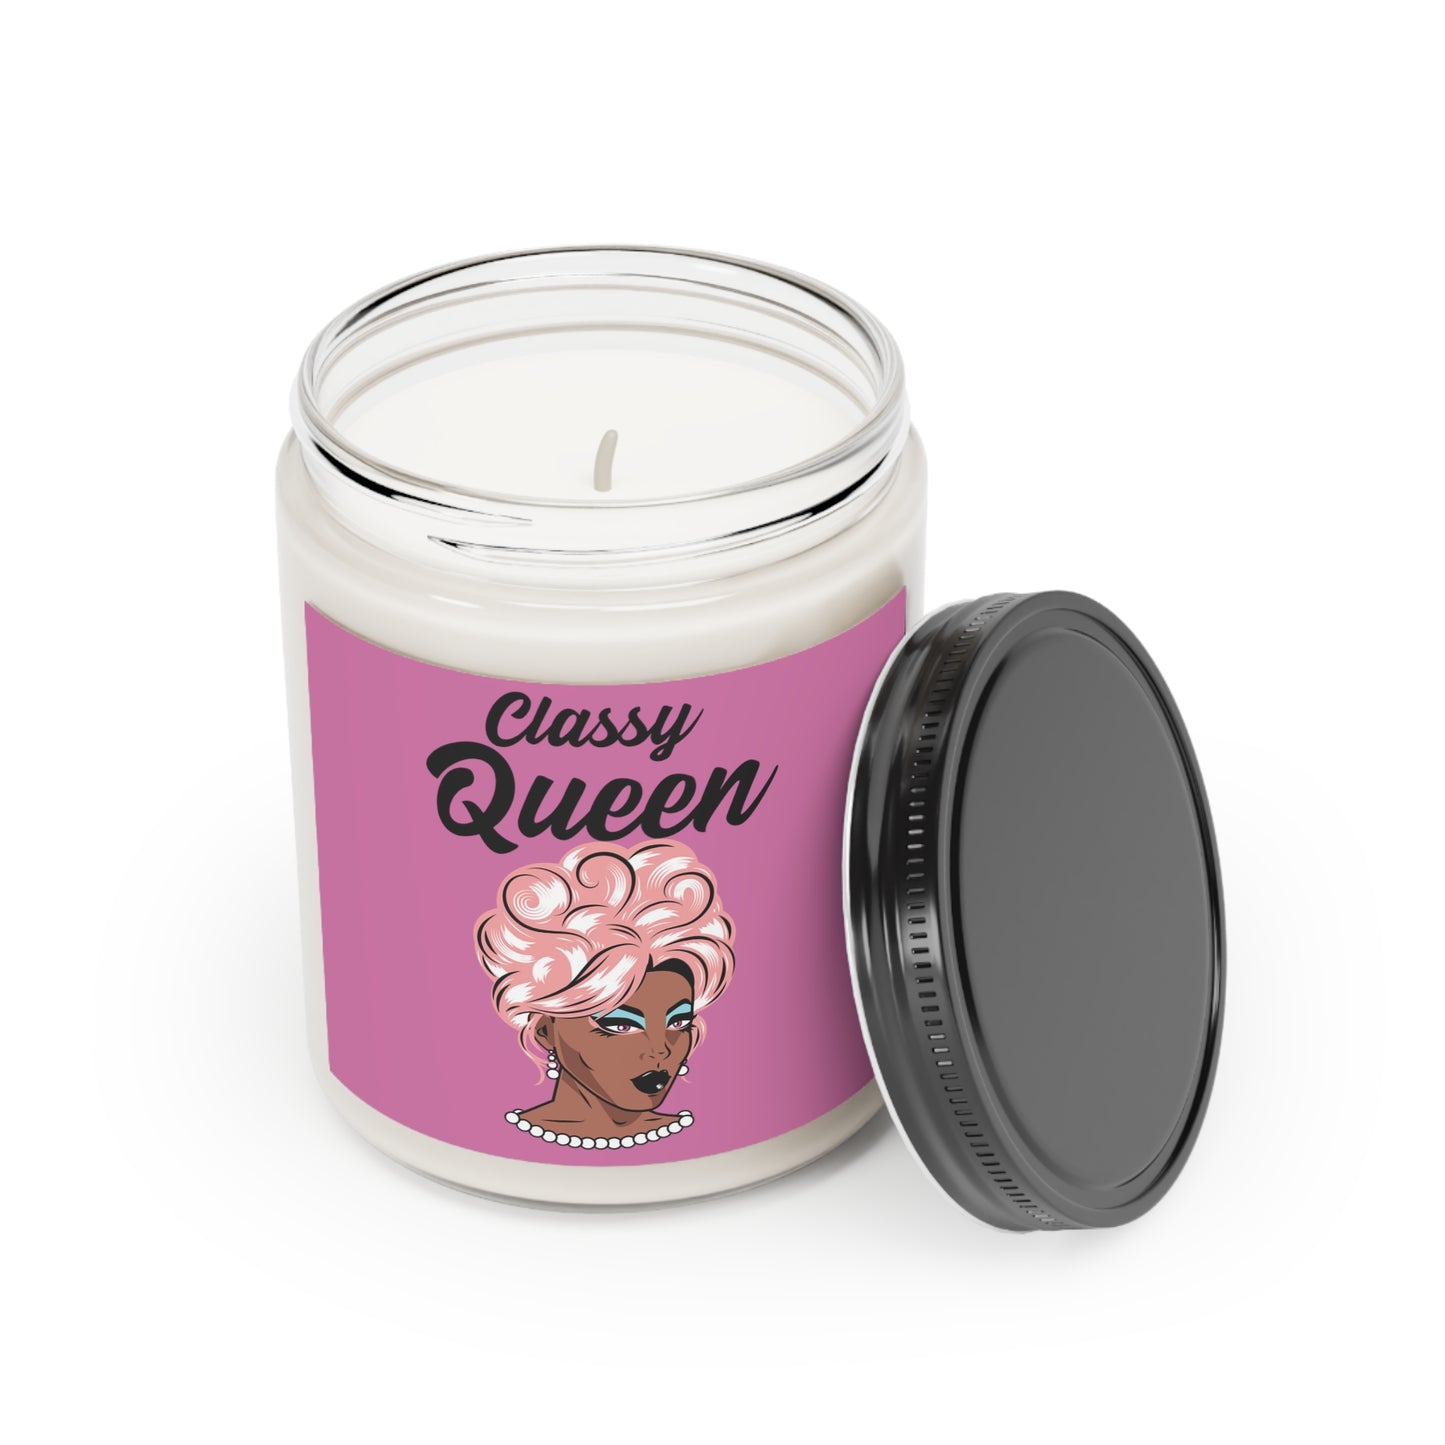 Classy Queen Scented Candle